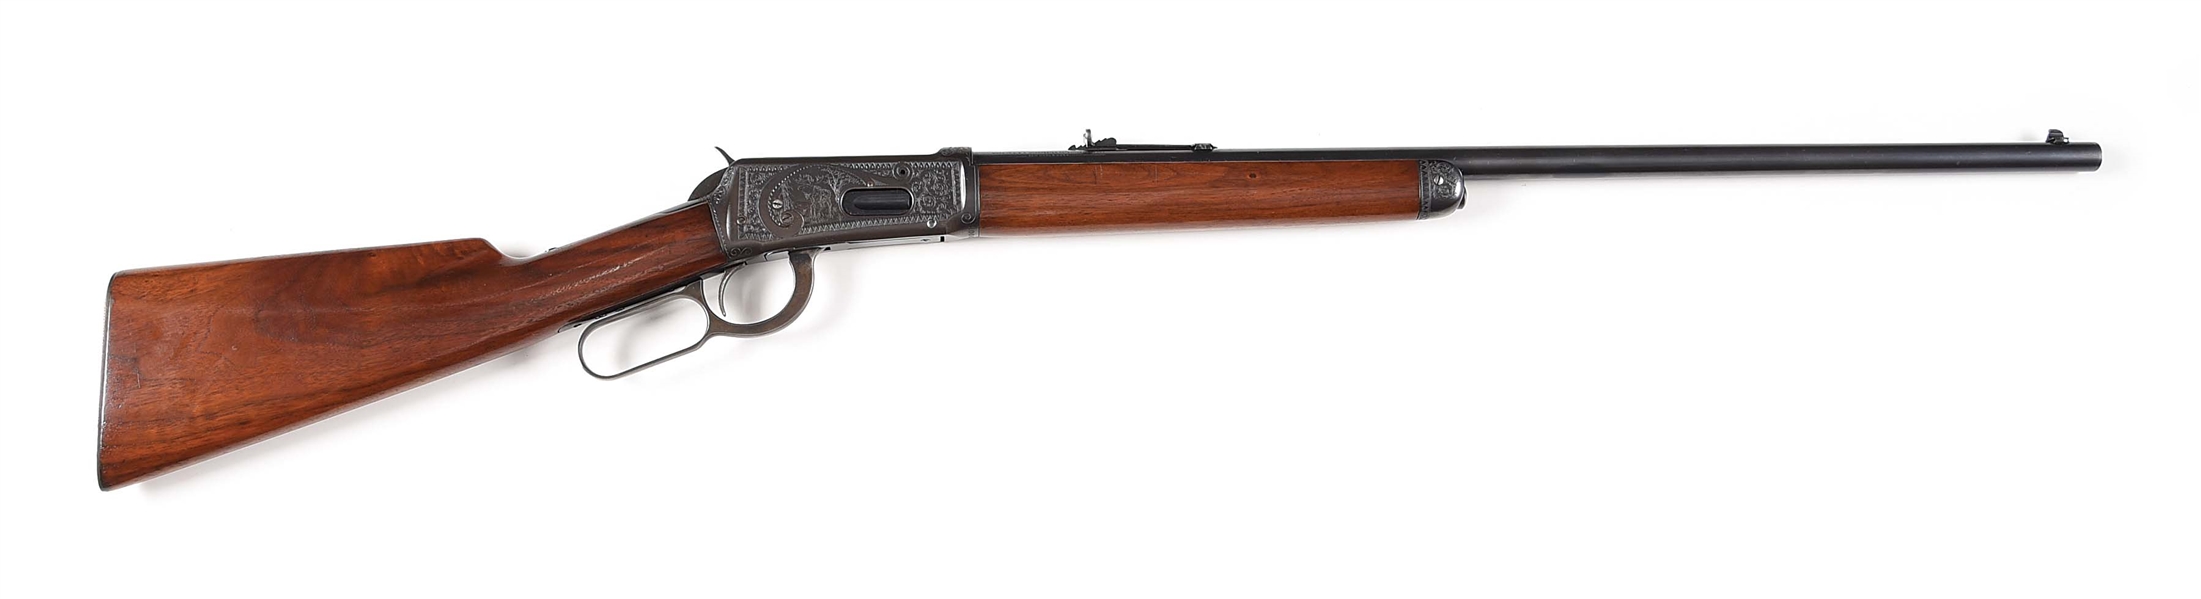 (C) CUSTOM ENGRAVED WINCHESTER MODEL 94 LEVER ACTION RIFLE (1927).